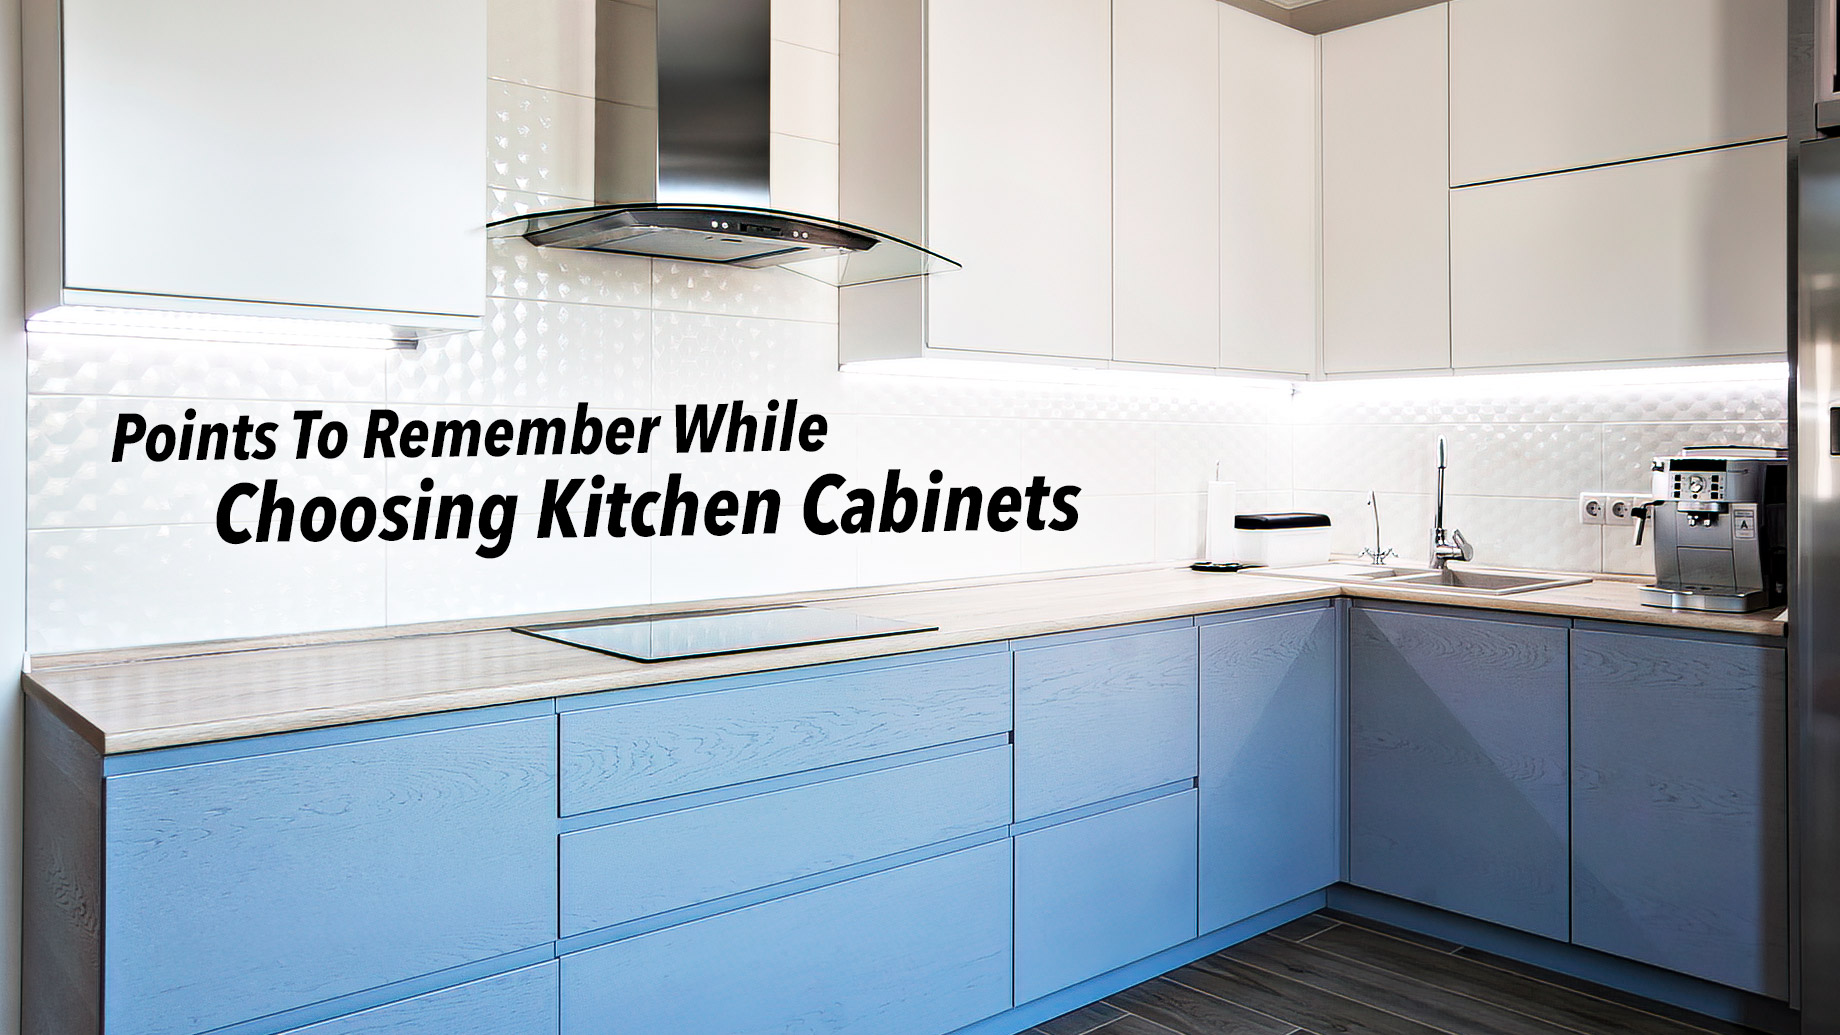 Points To Remember While Choosing Kitchen Cabinets